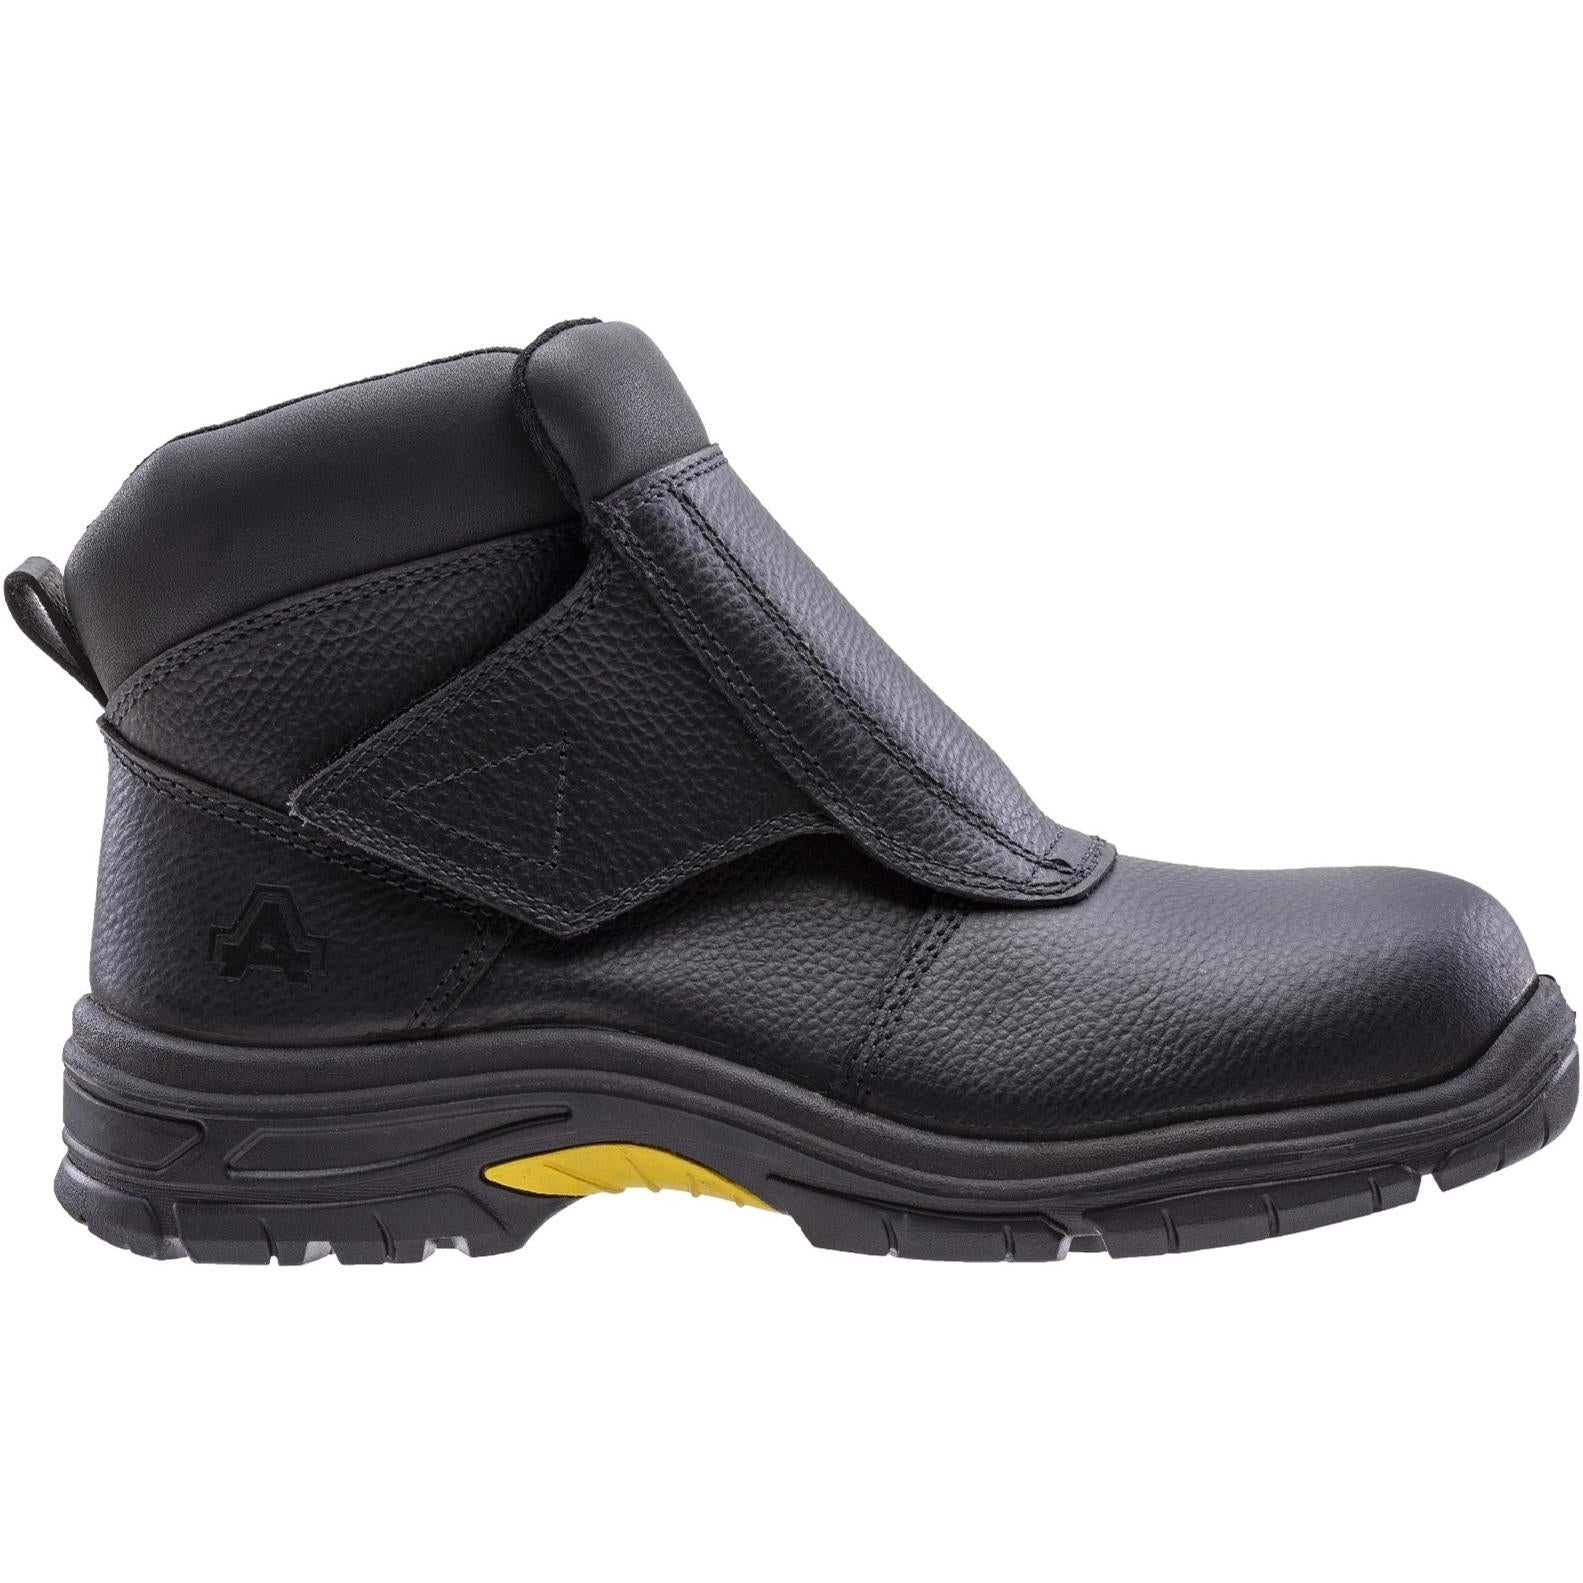 Amblers Safety AS950 Welding Safety Boot